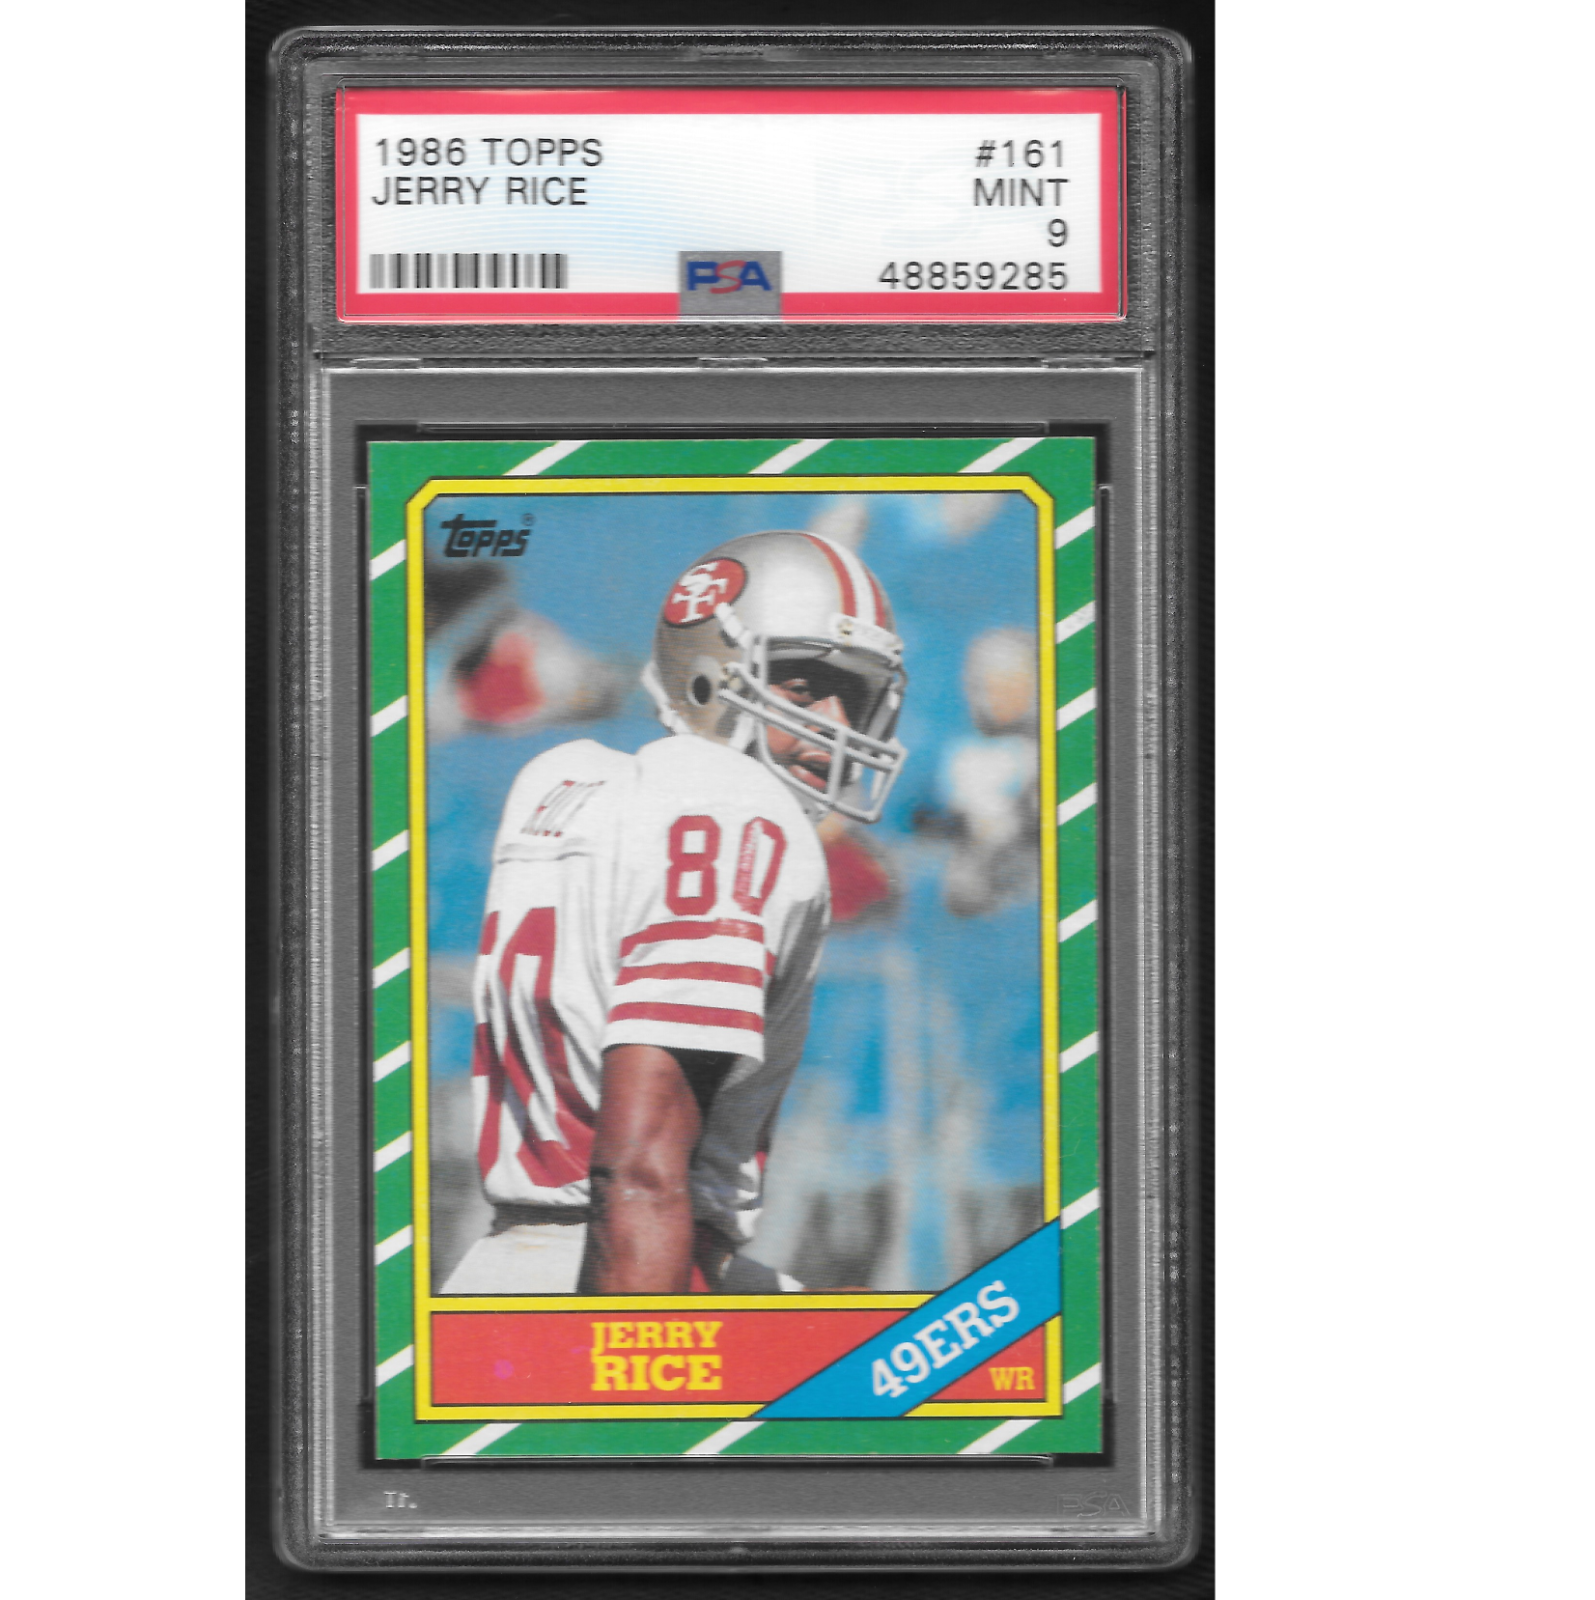 1986 Topps Football Jerry Rice ROOKIE RC 161 PSA 9 MINT 